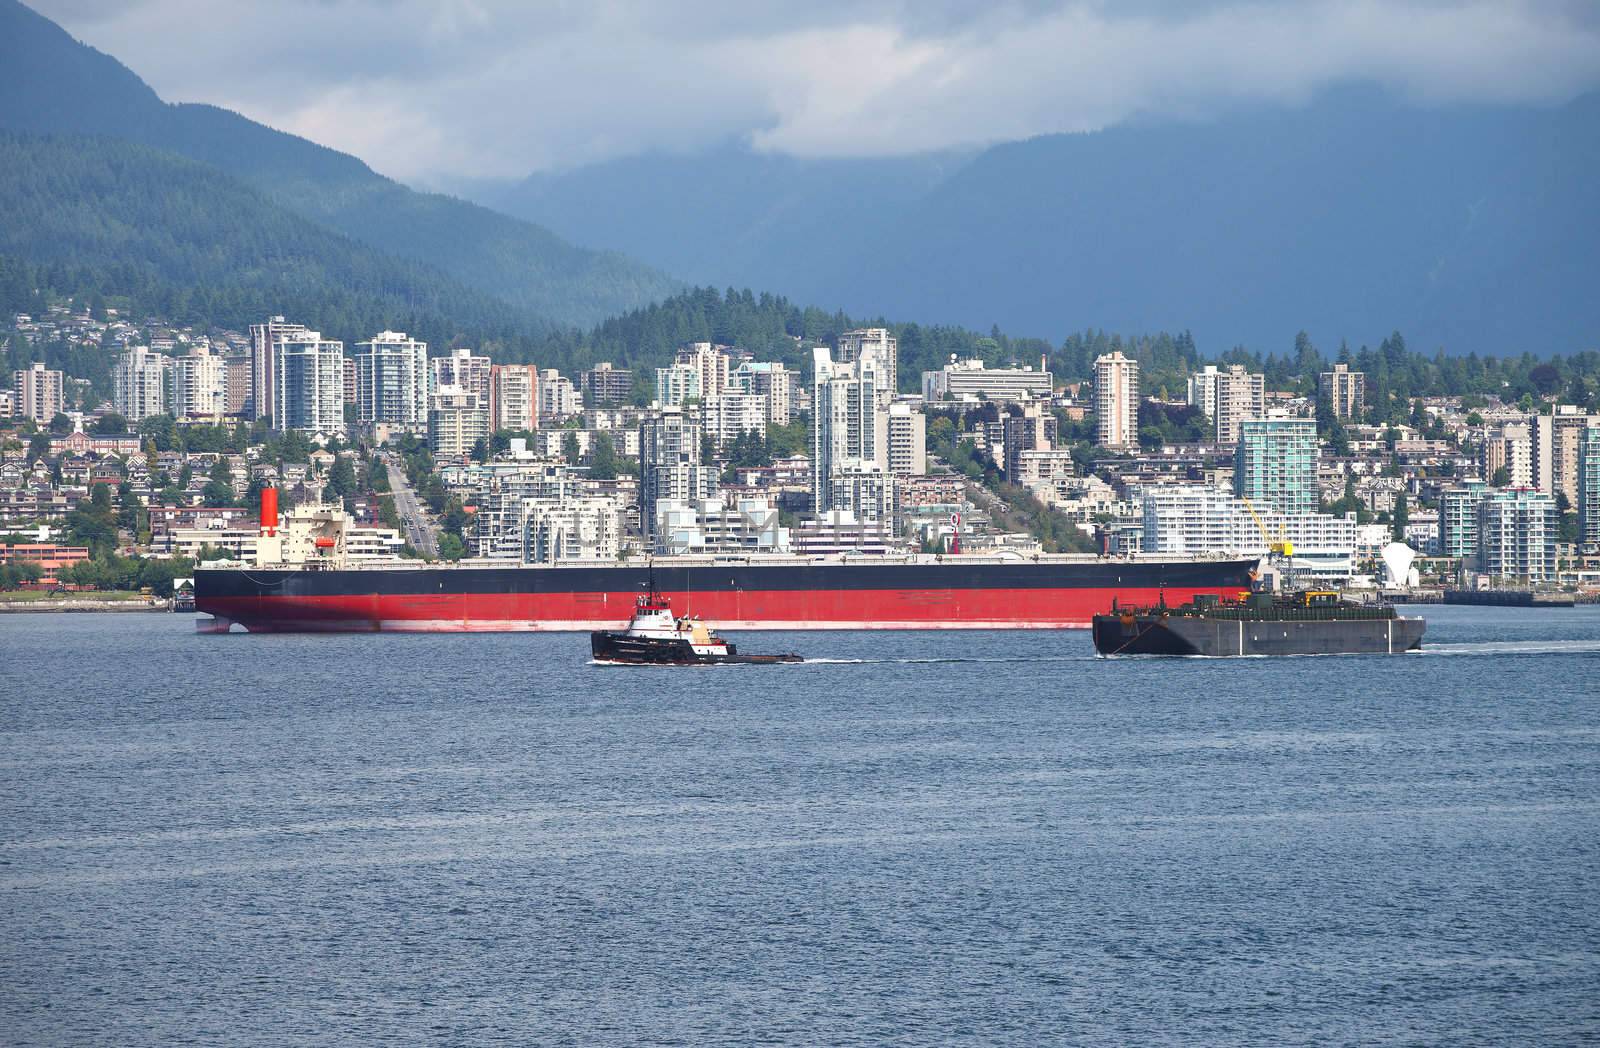 N. Vancouver a tanker & tug boat in Burrard inlet CA. by Rigucci